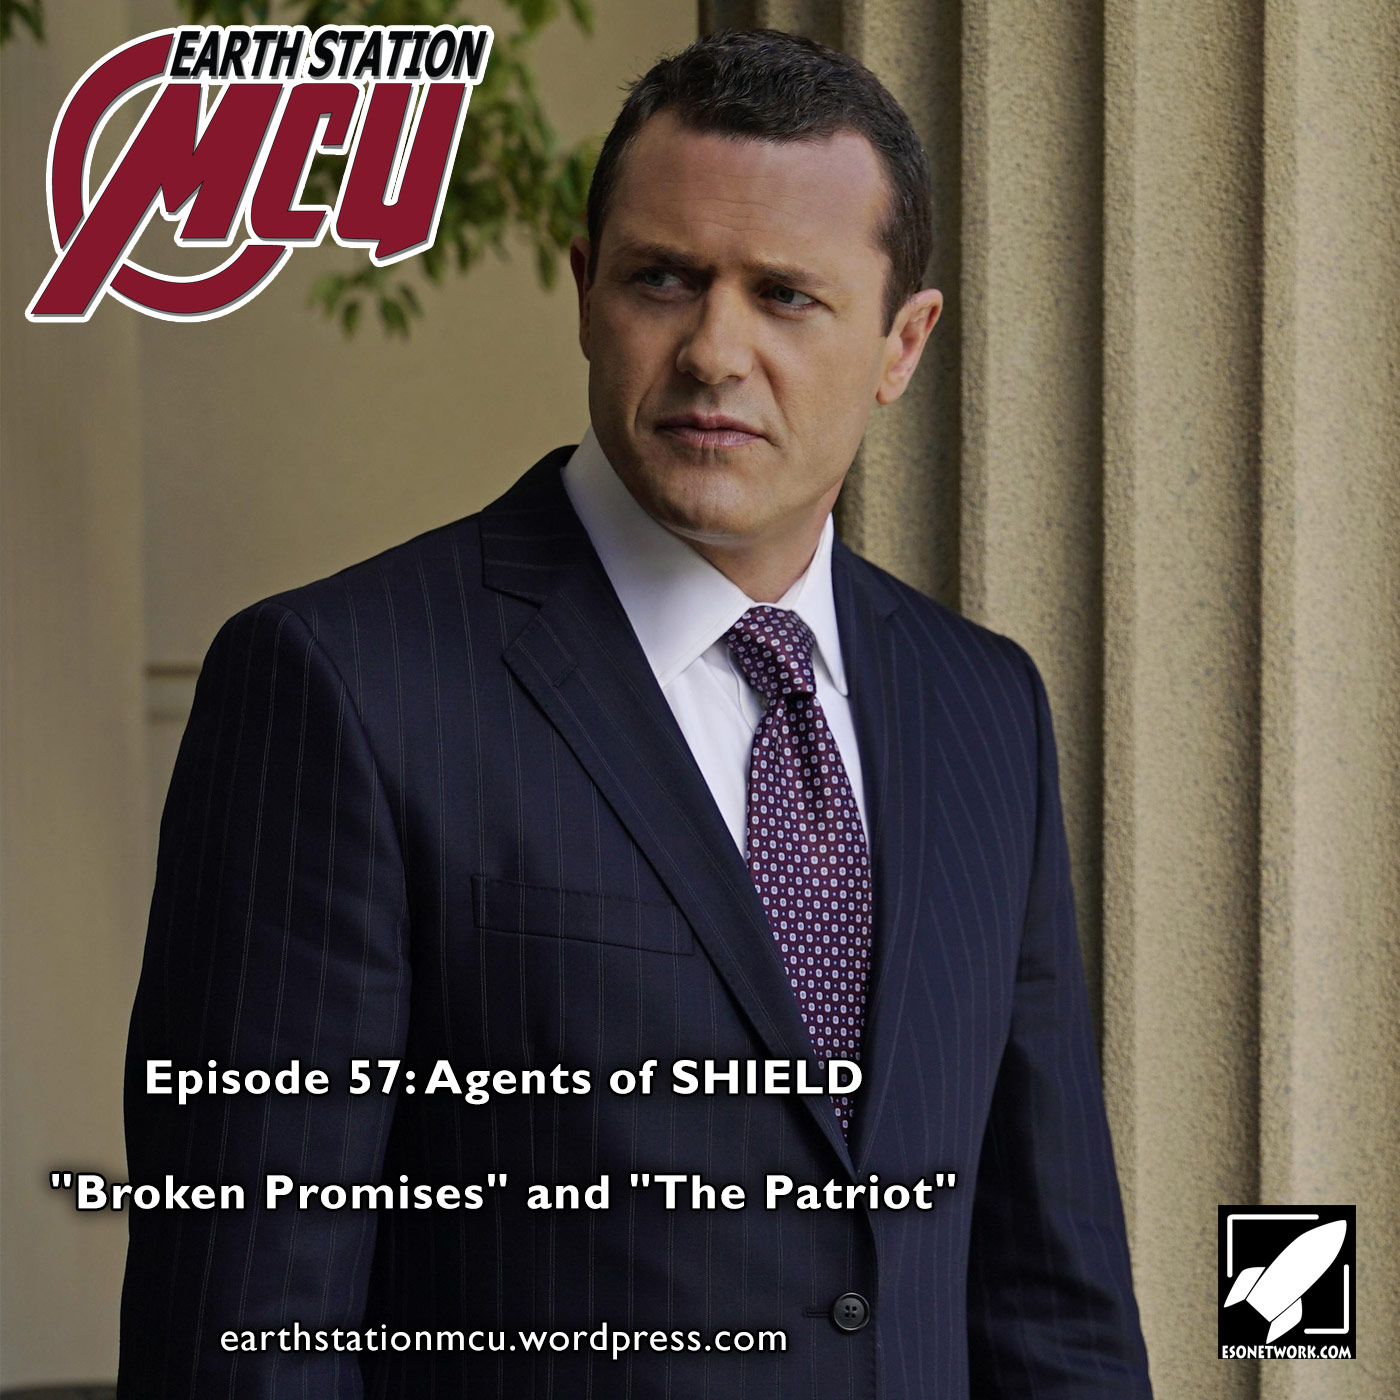 Earth Station MCU Episode 57: Agents of SHIELD 